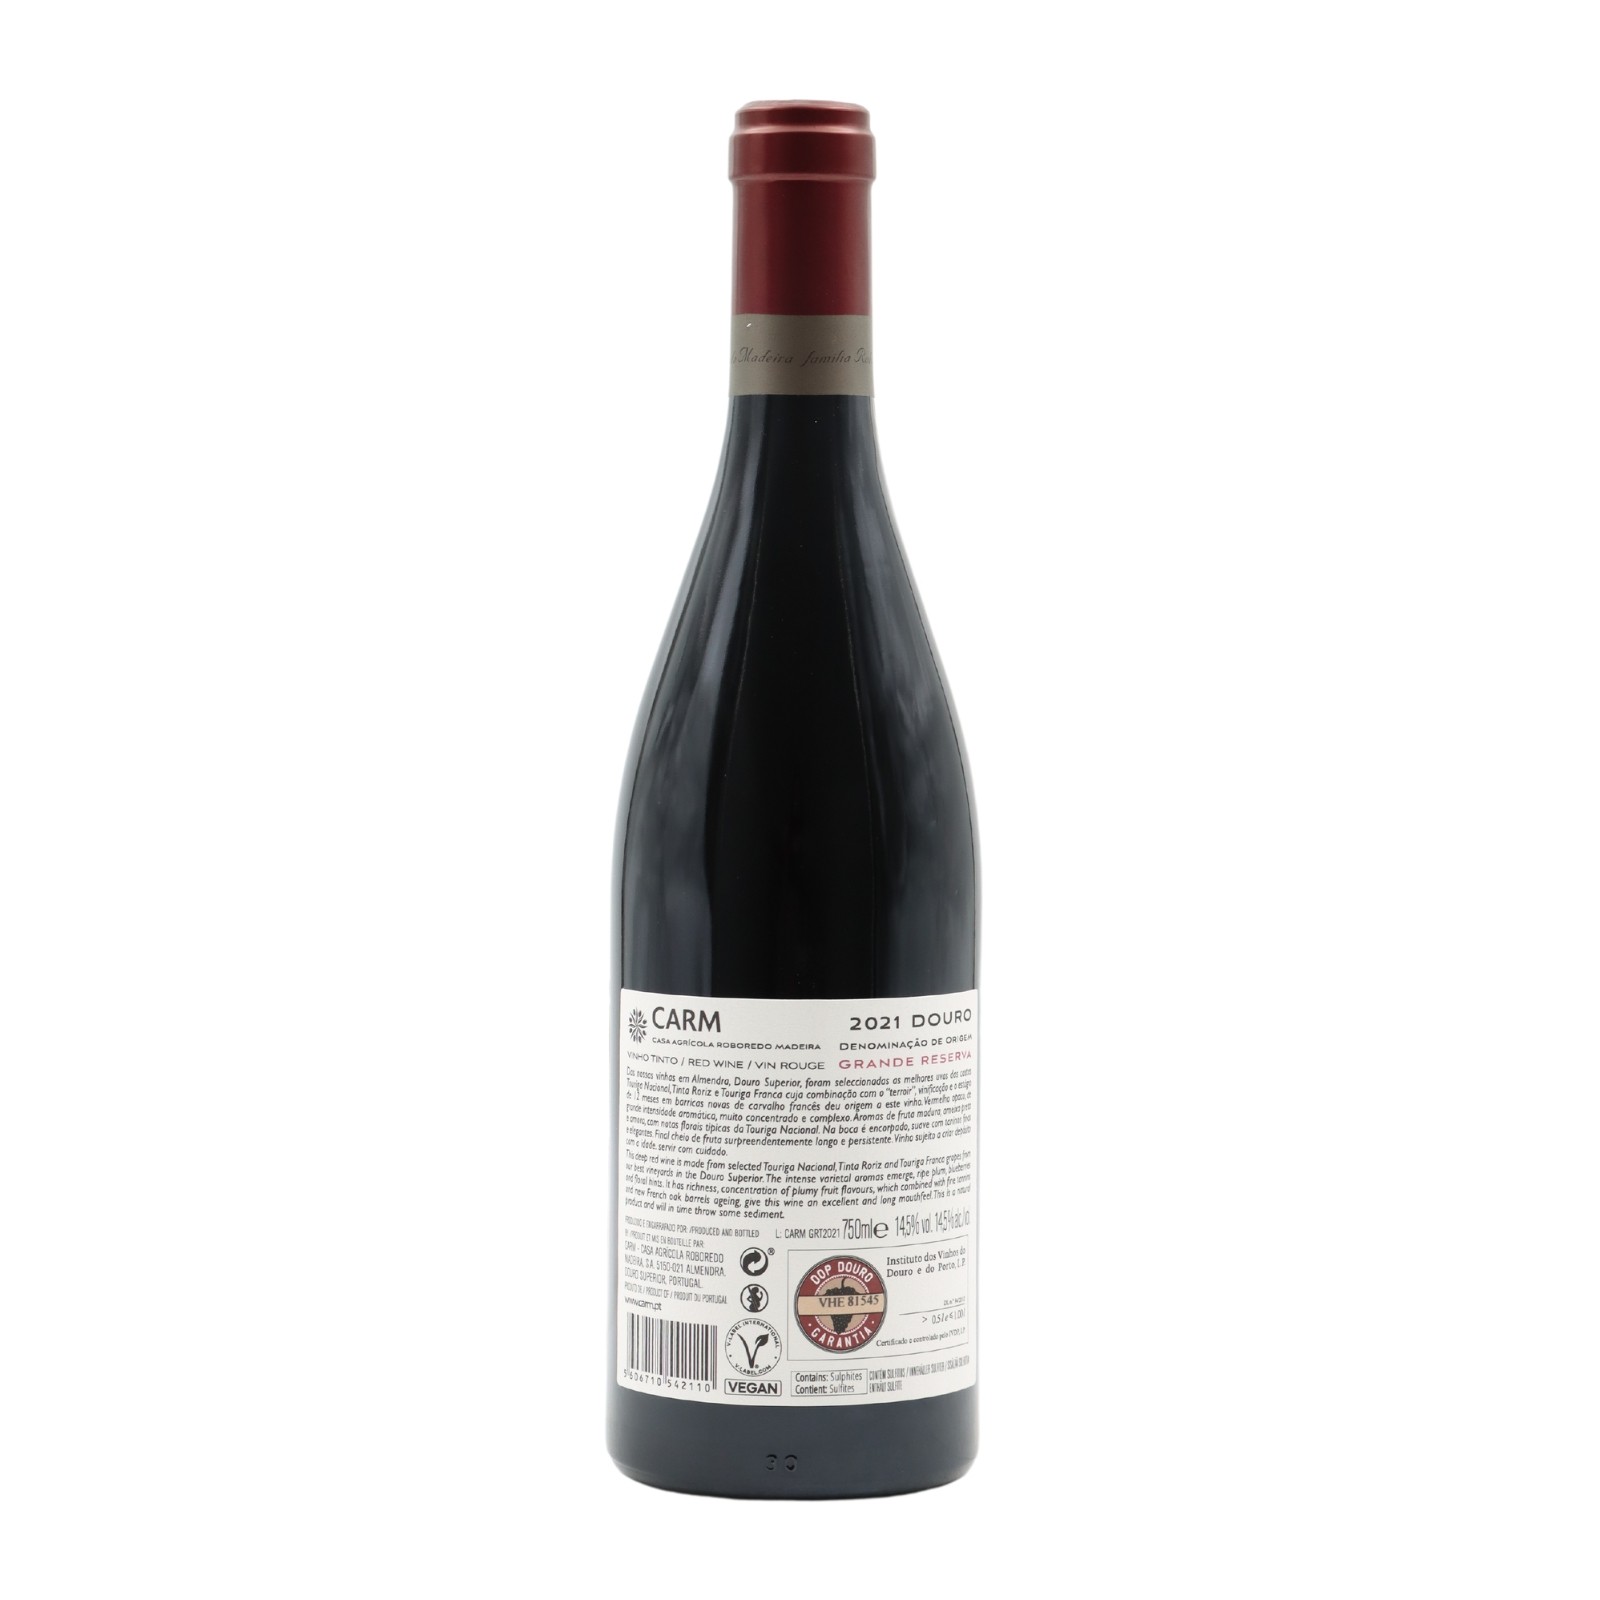 CARM Grand Reserve Red 2018